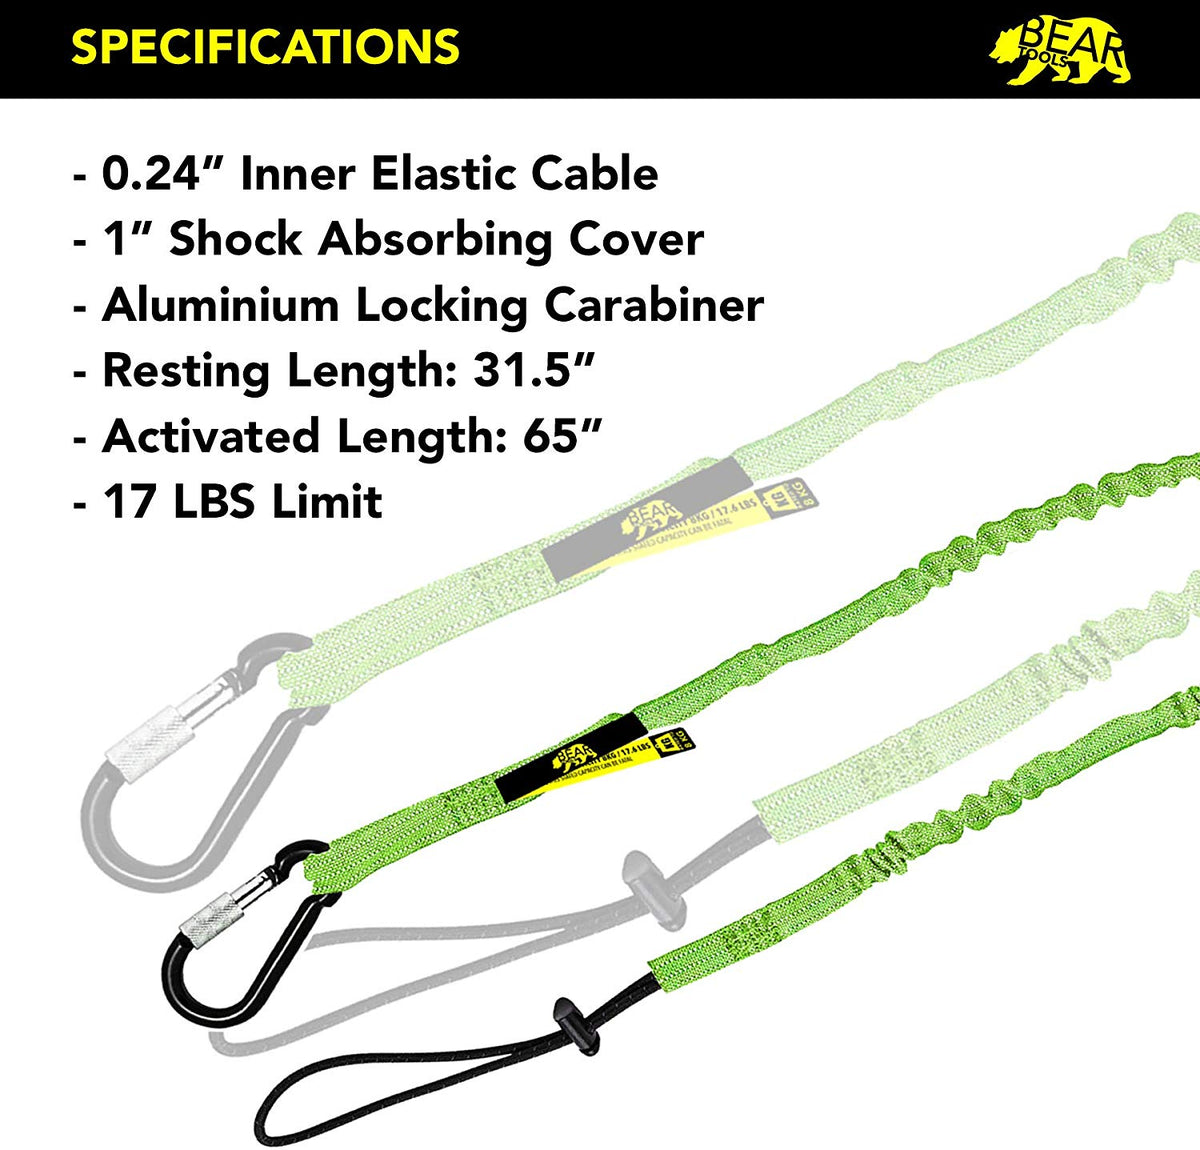 GearbyBear BearTOOLS Tool Lanyard with Buckle Strap - Clip Bungee Cord -  Heavy Duty Screw Locking Carabiner - Fall Protection and Safety 